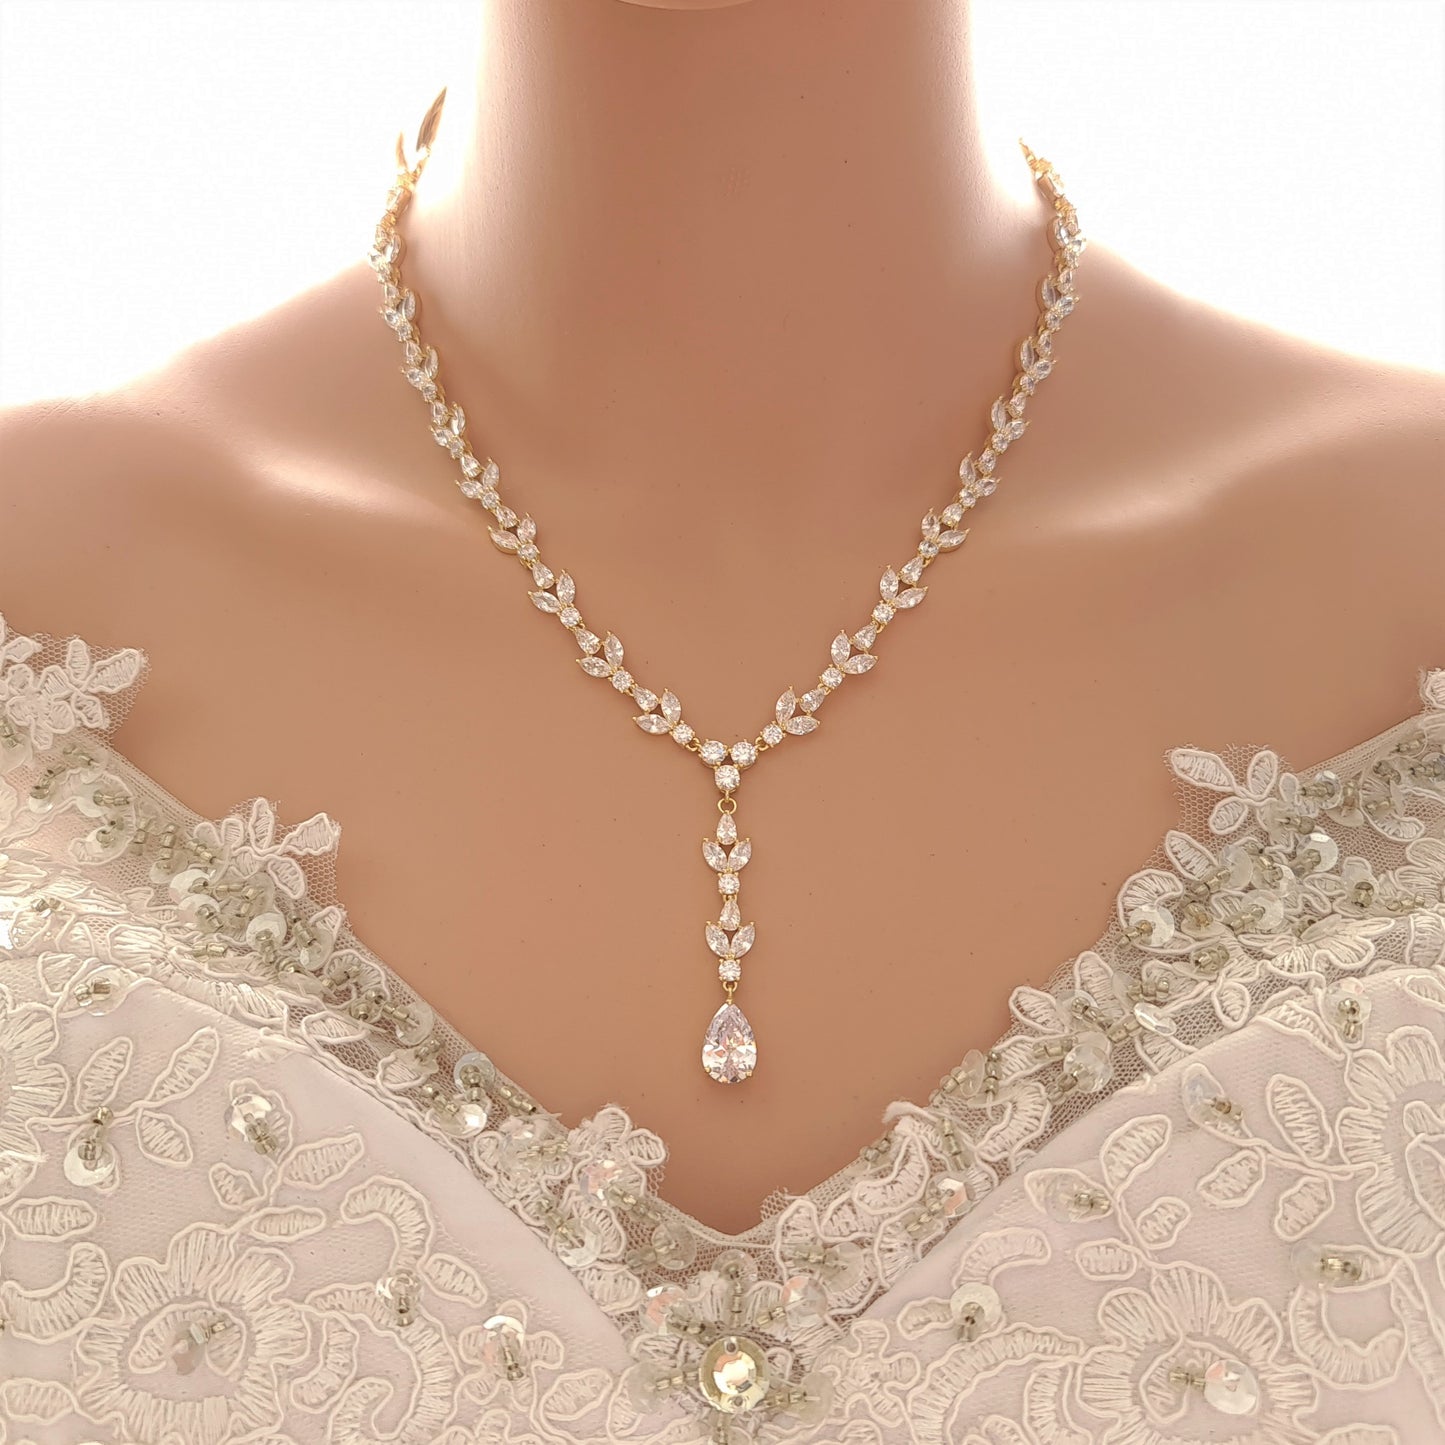 Rose Gold Statement Necklace with Simple Backdrop for Weddings- Anya